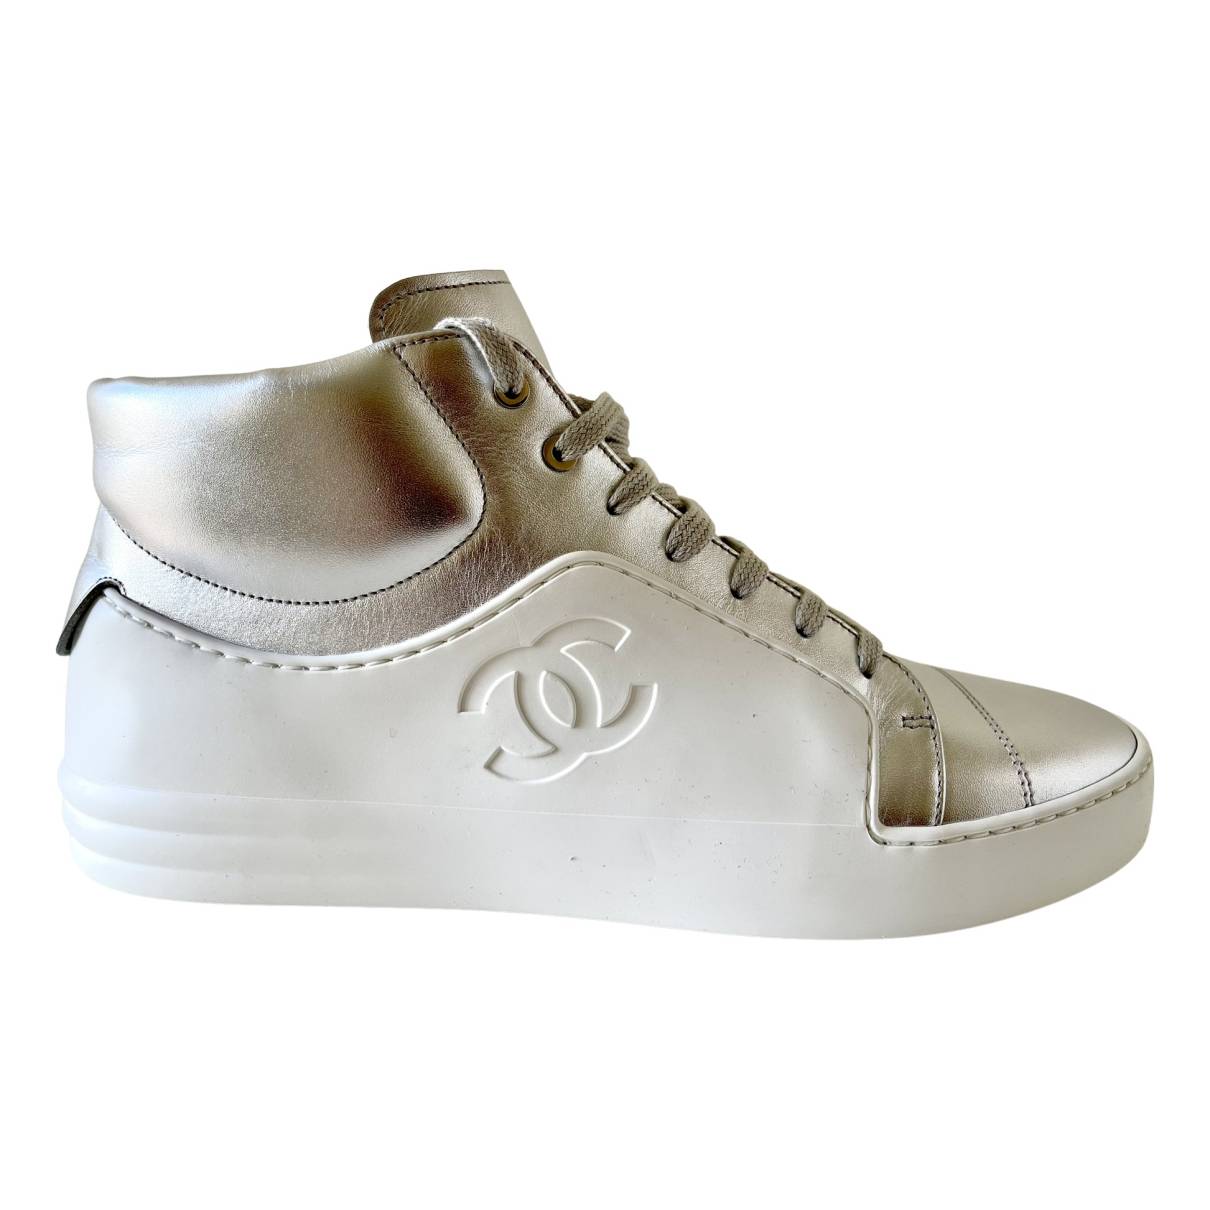 white and silver chanel sneakers